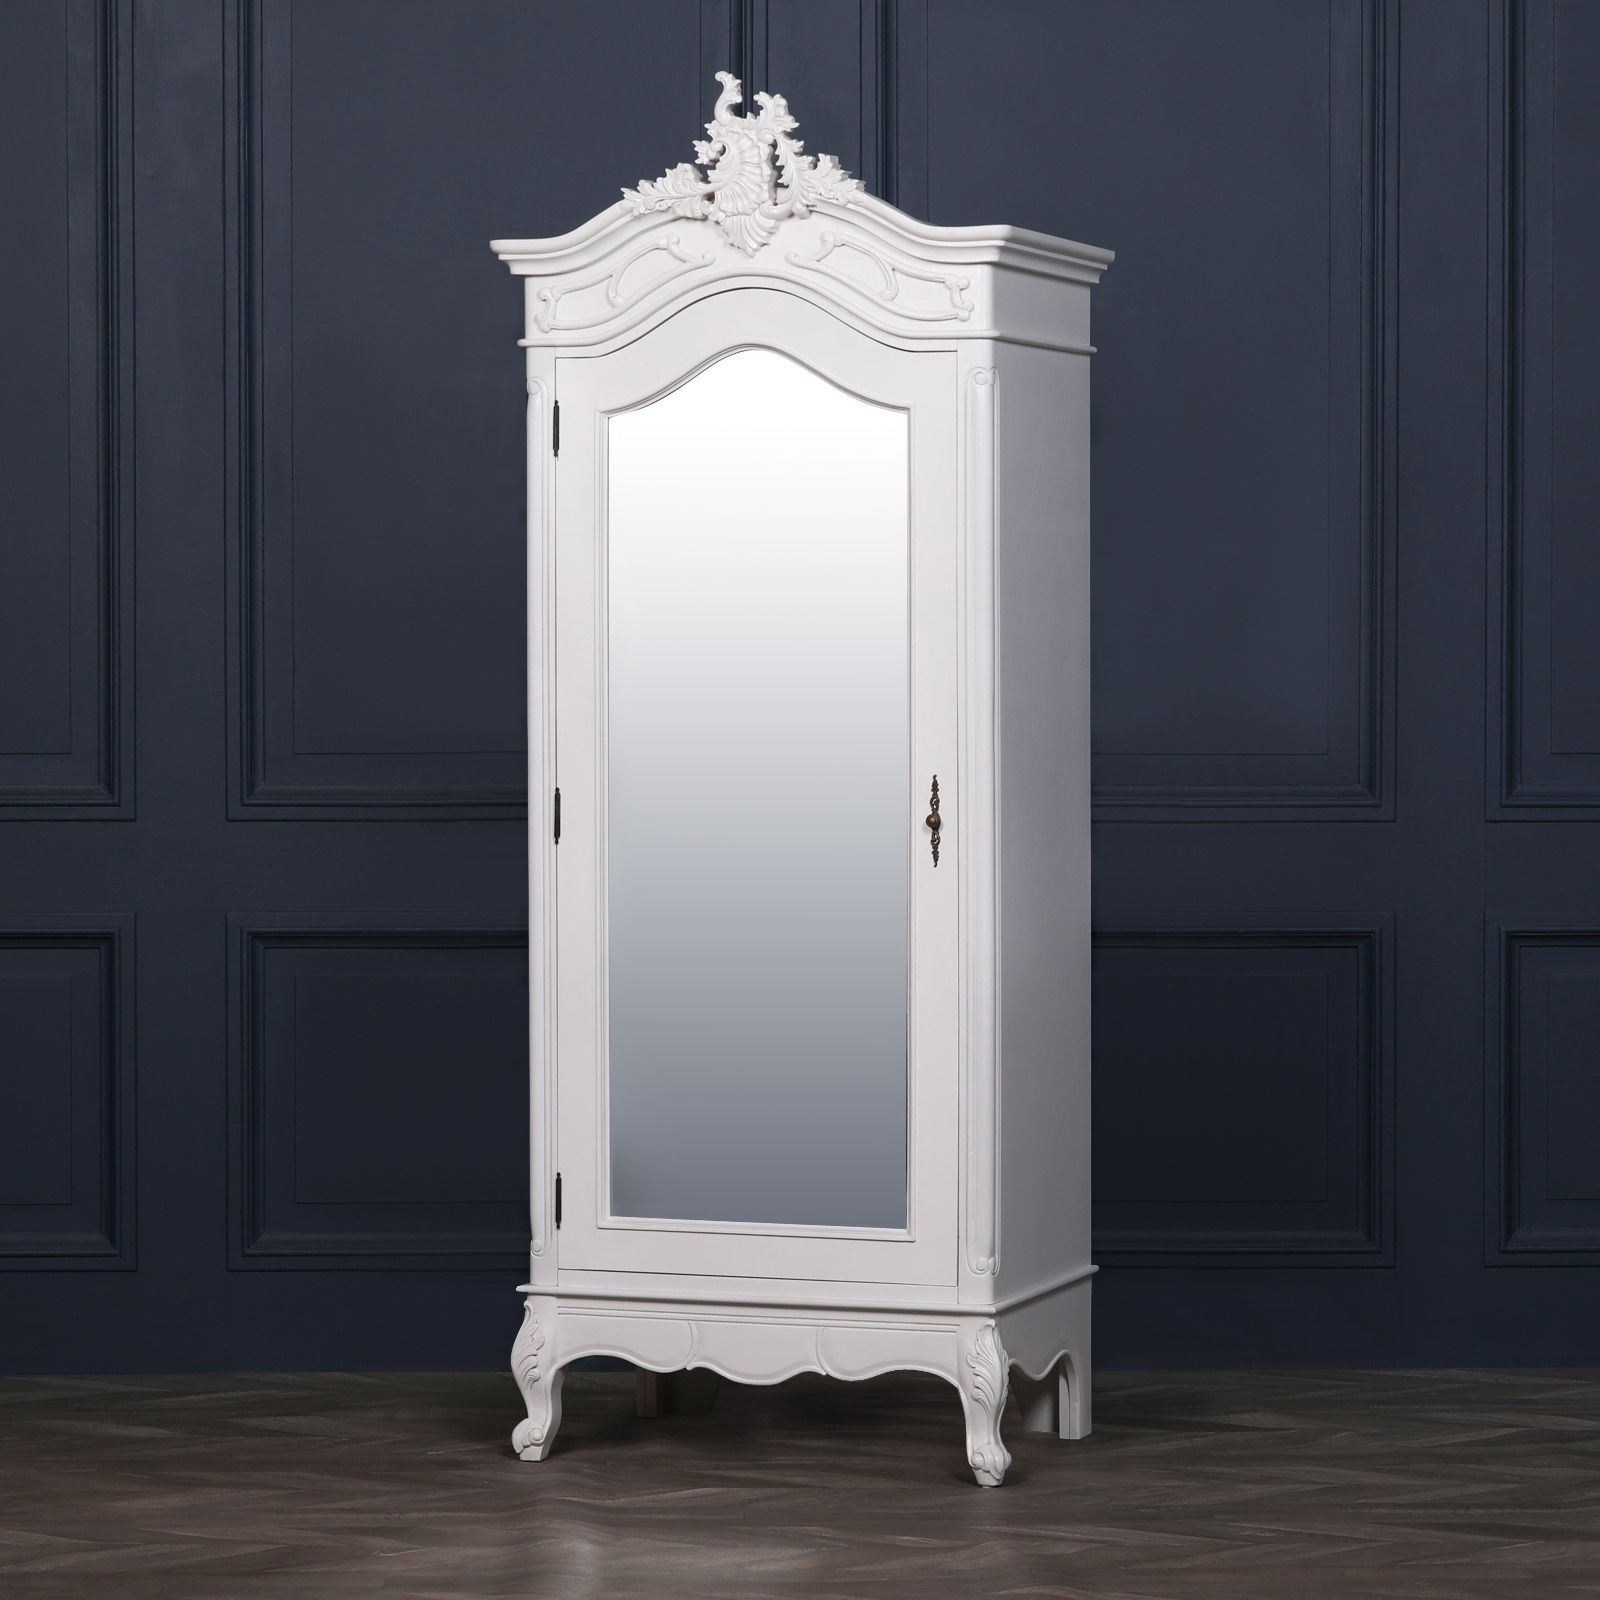 Hand Carved French White Single Armoire Wardrobe Mirror Door Regarding Single White Wardrobes With Mirror (View 4 of 20)